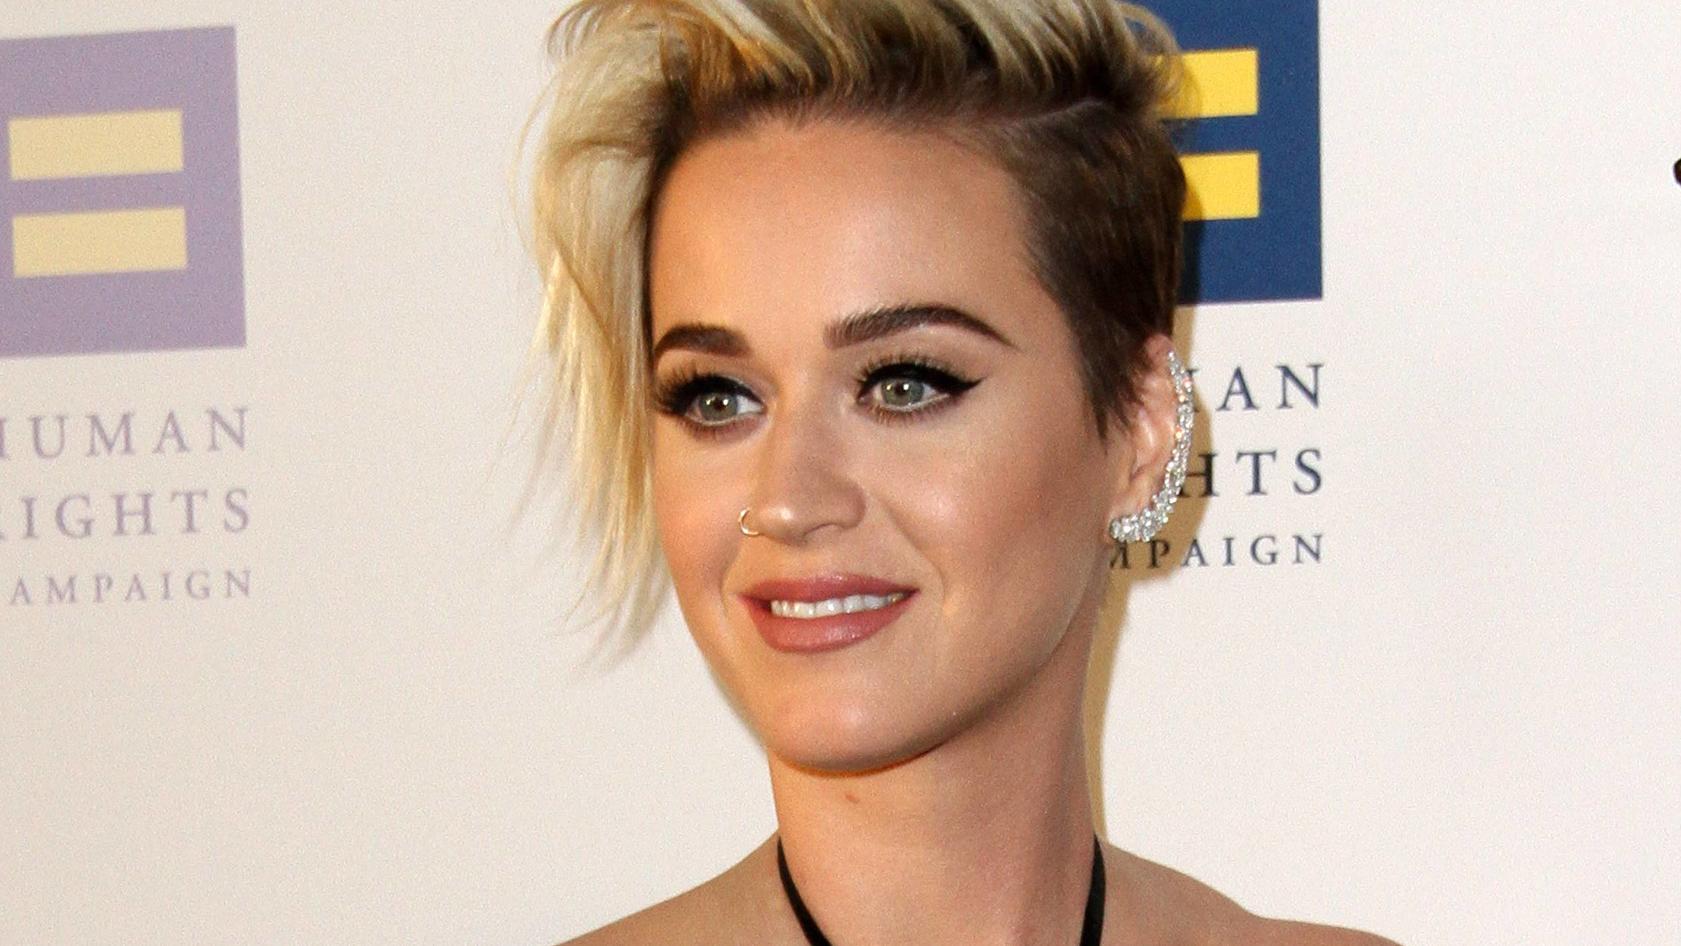 March 18, 2017 - Los Angeles, CA, United States - 18 March 2017 - Los Angeles, California - Katy Perry.. The Human Rights Campaign 2017 Los Angeles Gala Dinner held at the JW Marriott LA Live. Photo Credit: AdMedia Los Angeles United States PUBLICATI